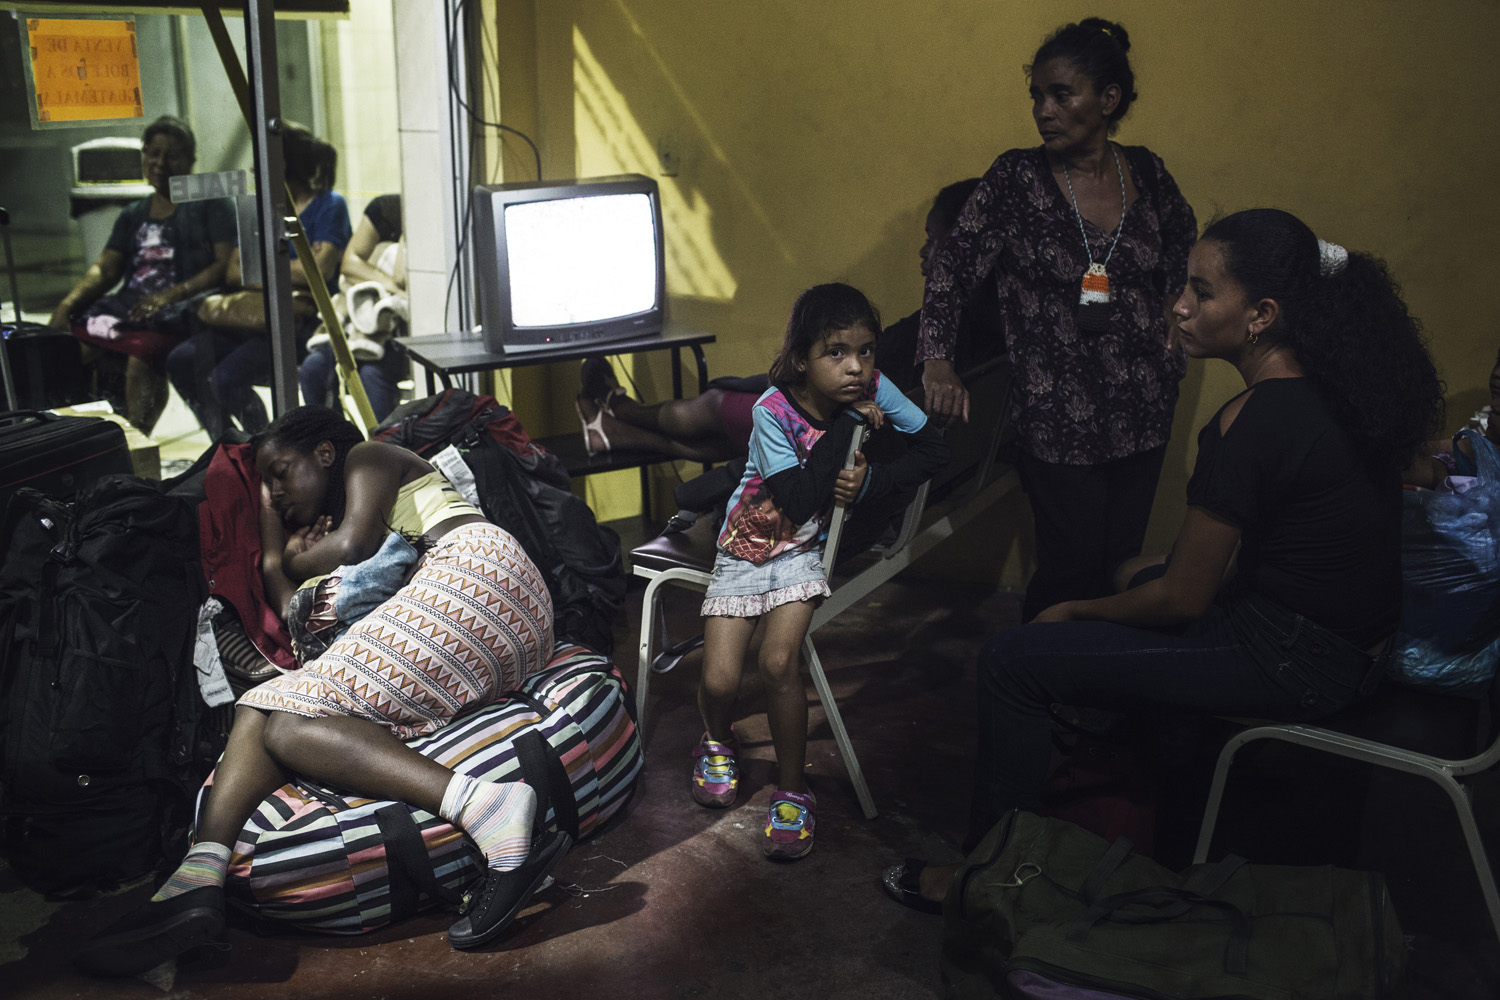 Women and children wait at a bus terminal in San Pedro Sula to begin their journey to the U.S. border (Ross McDonnell for TIME)